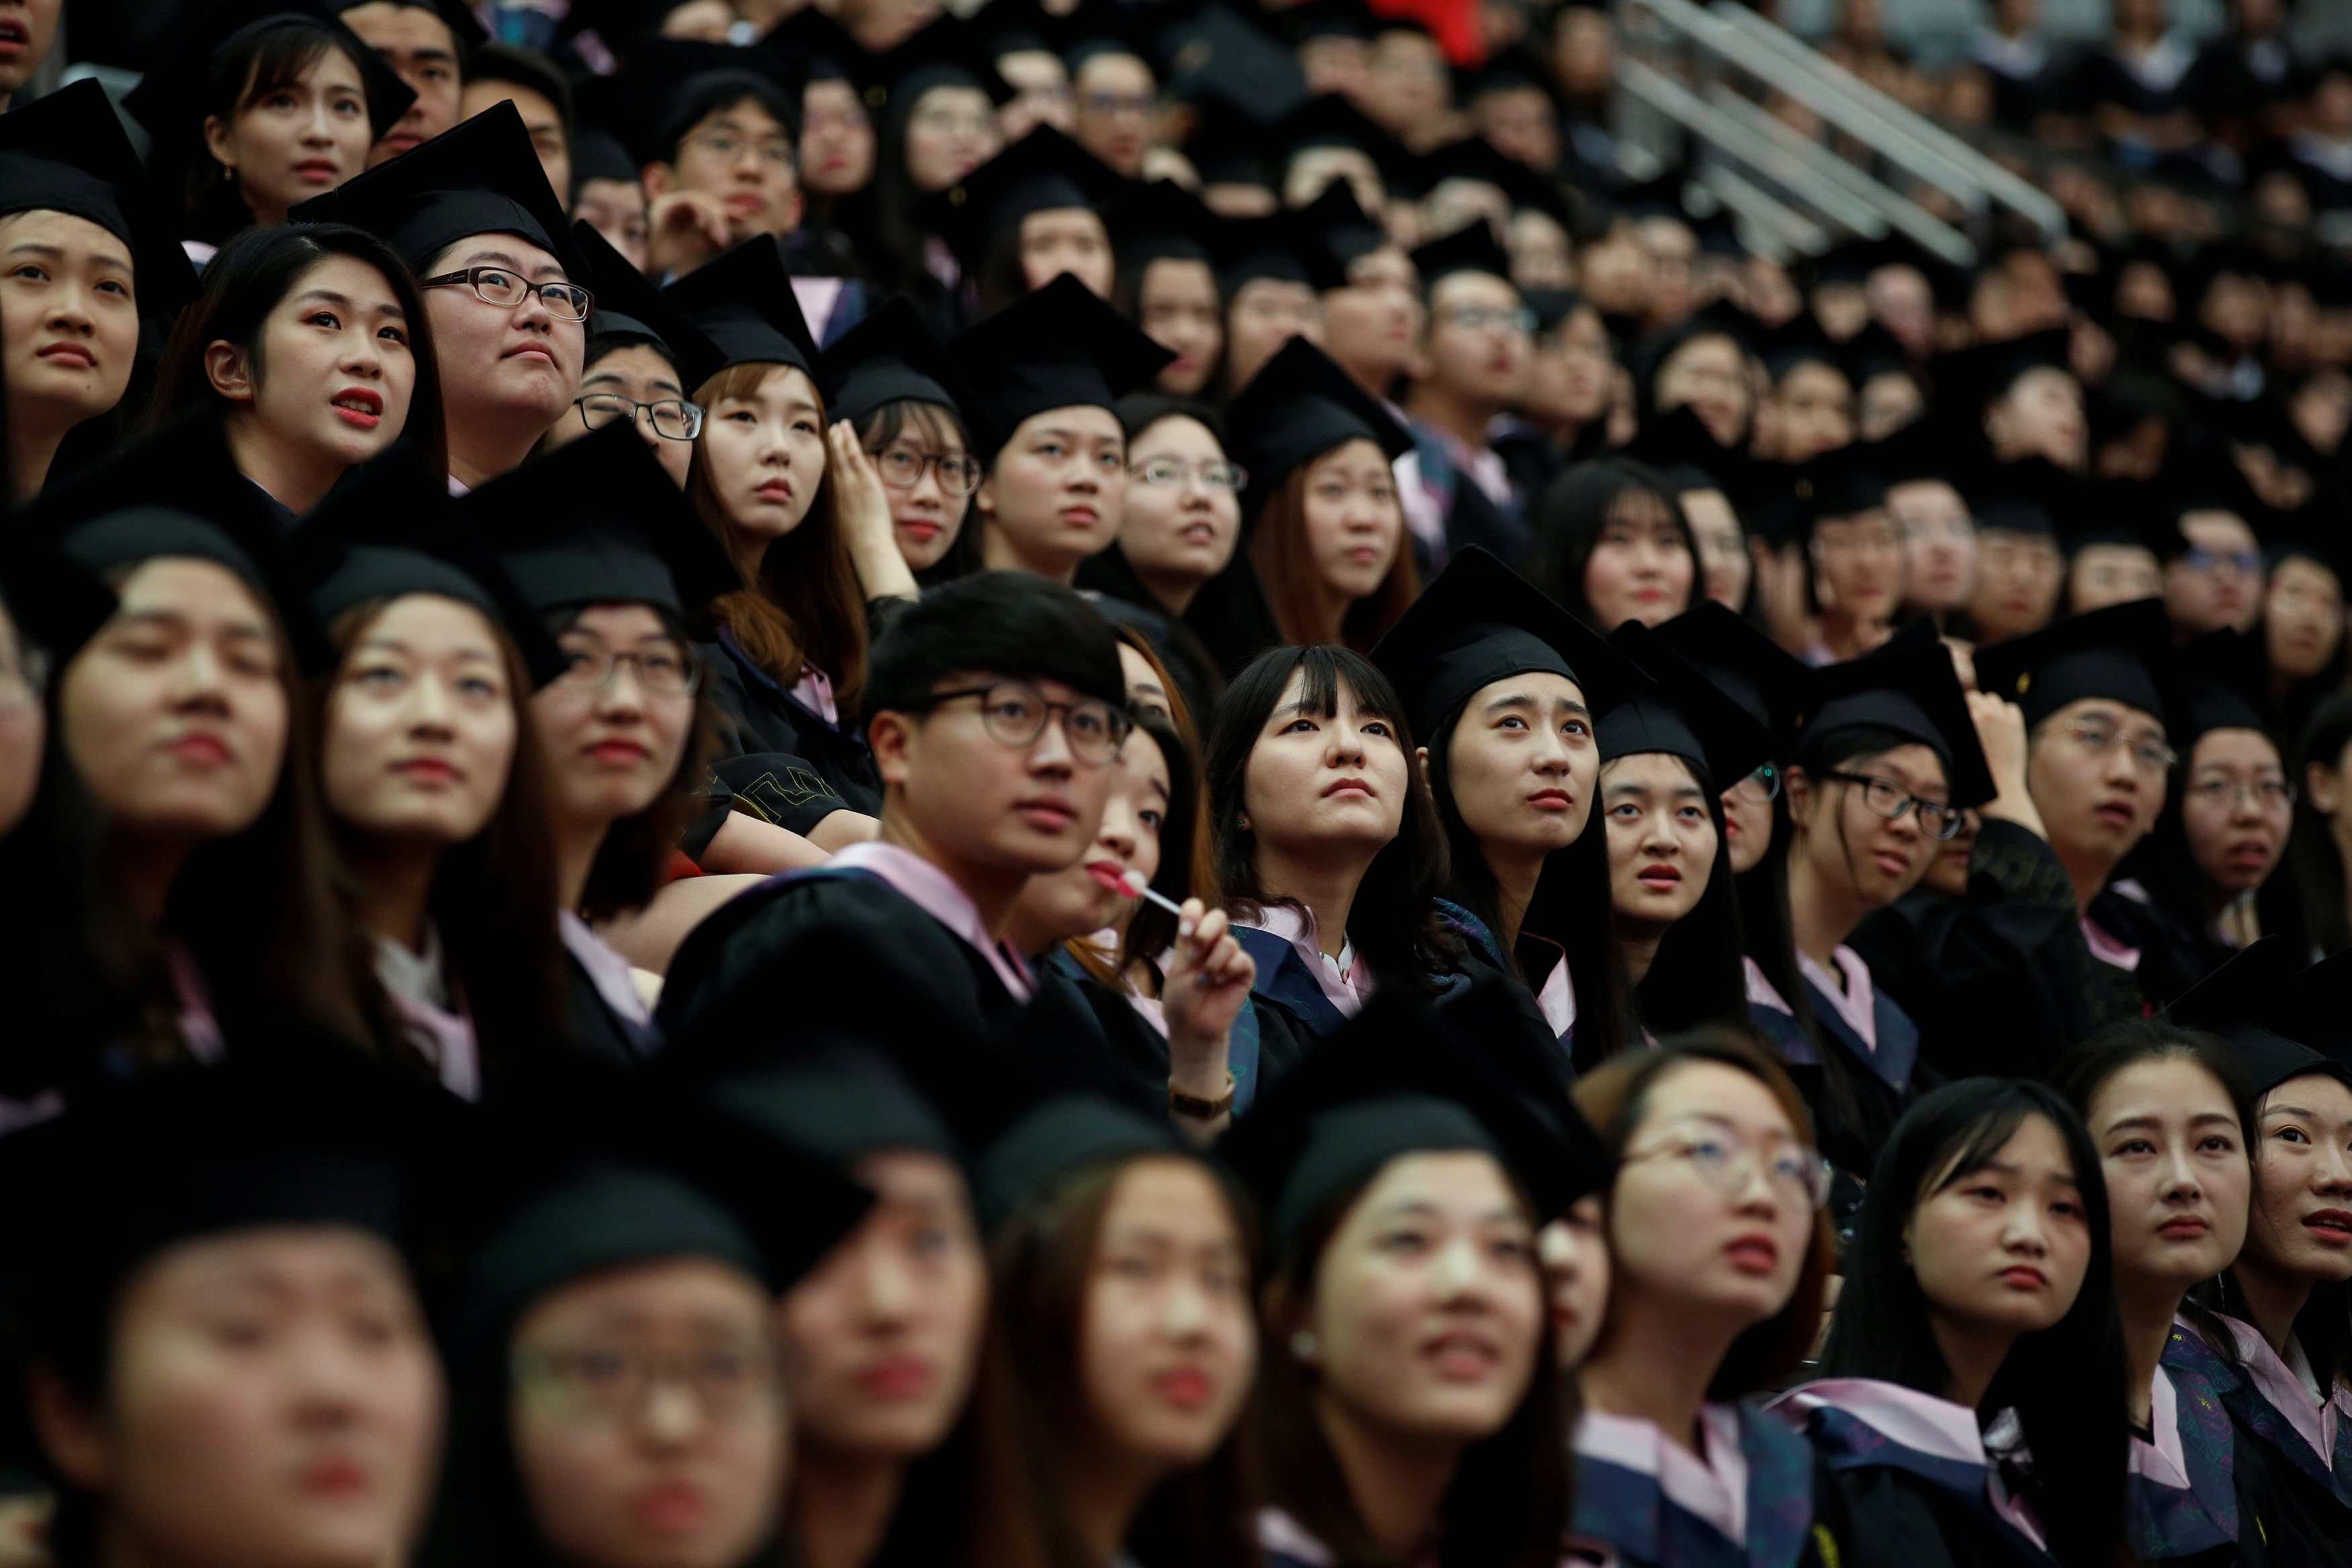 Students attend a graduation ceremony at Fudan University in Shanghai, in June. Photo: Reuters